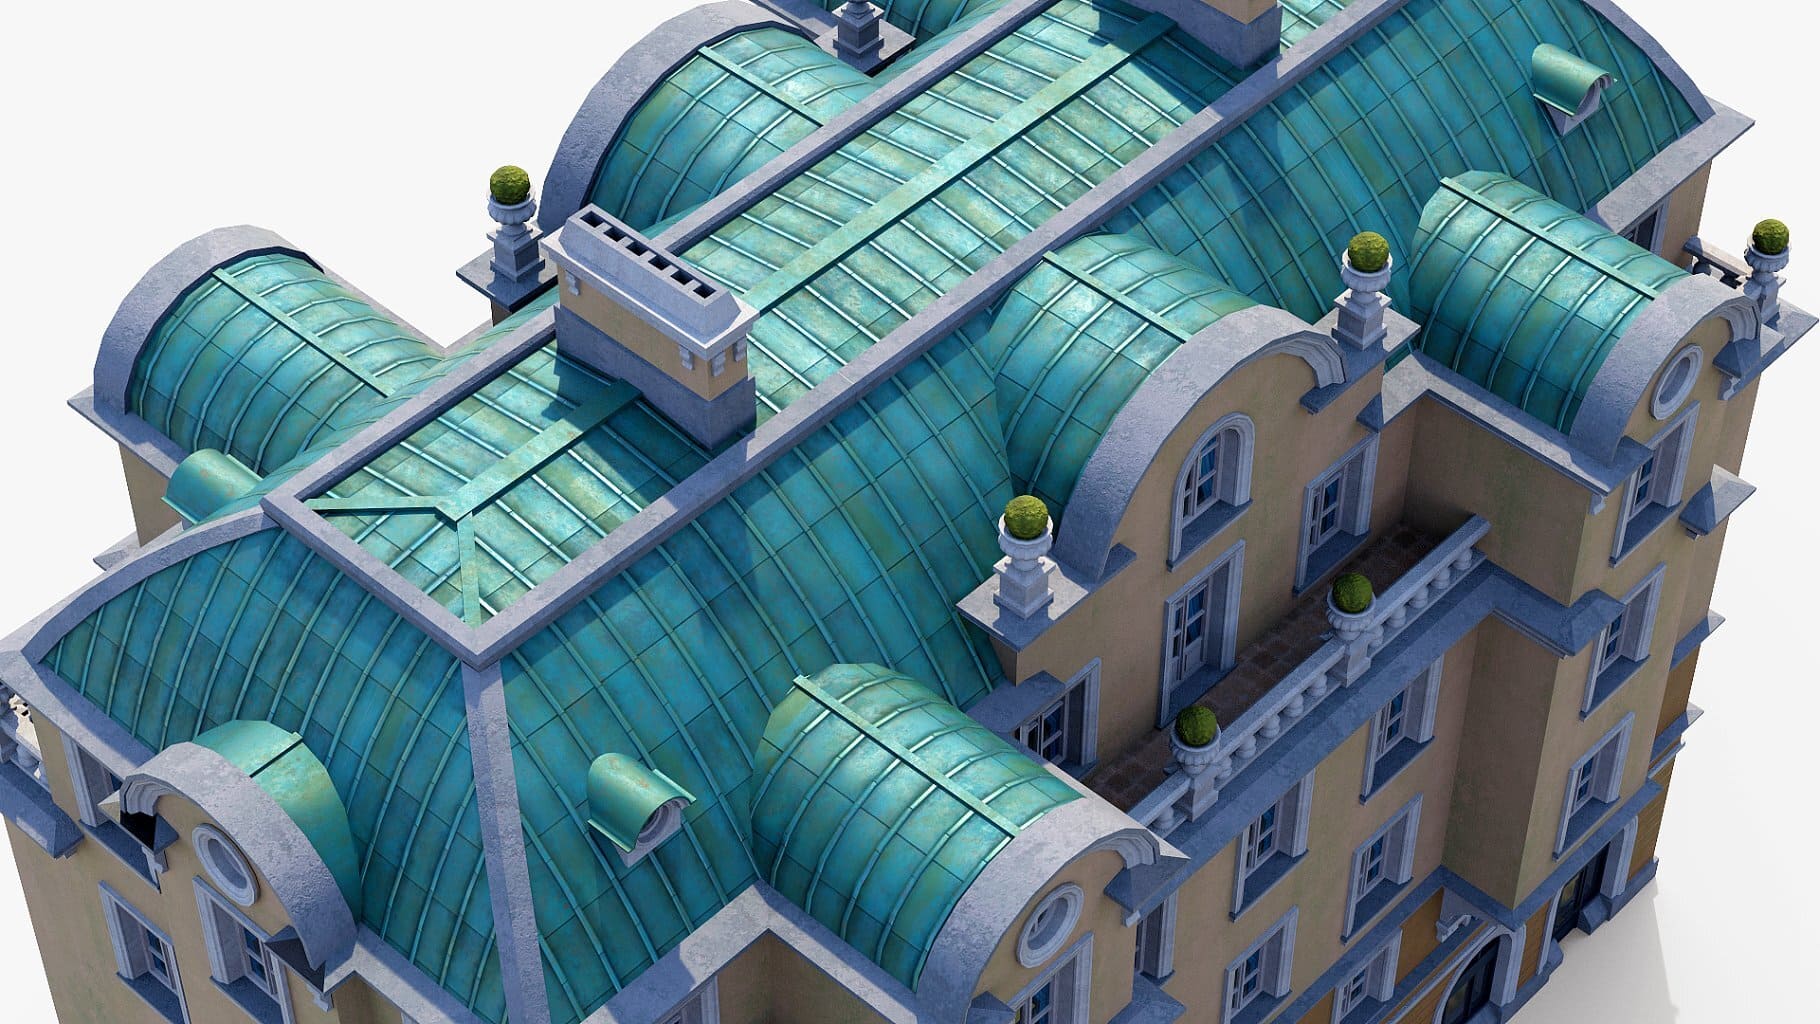 Top view of the green roof of the neoclassical hotel.